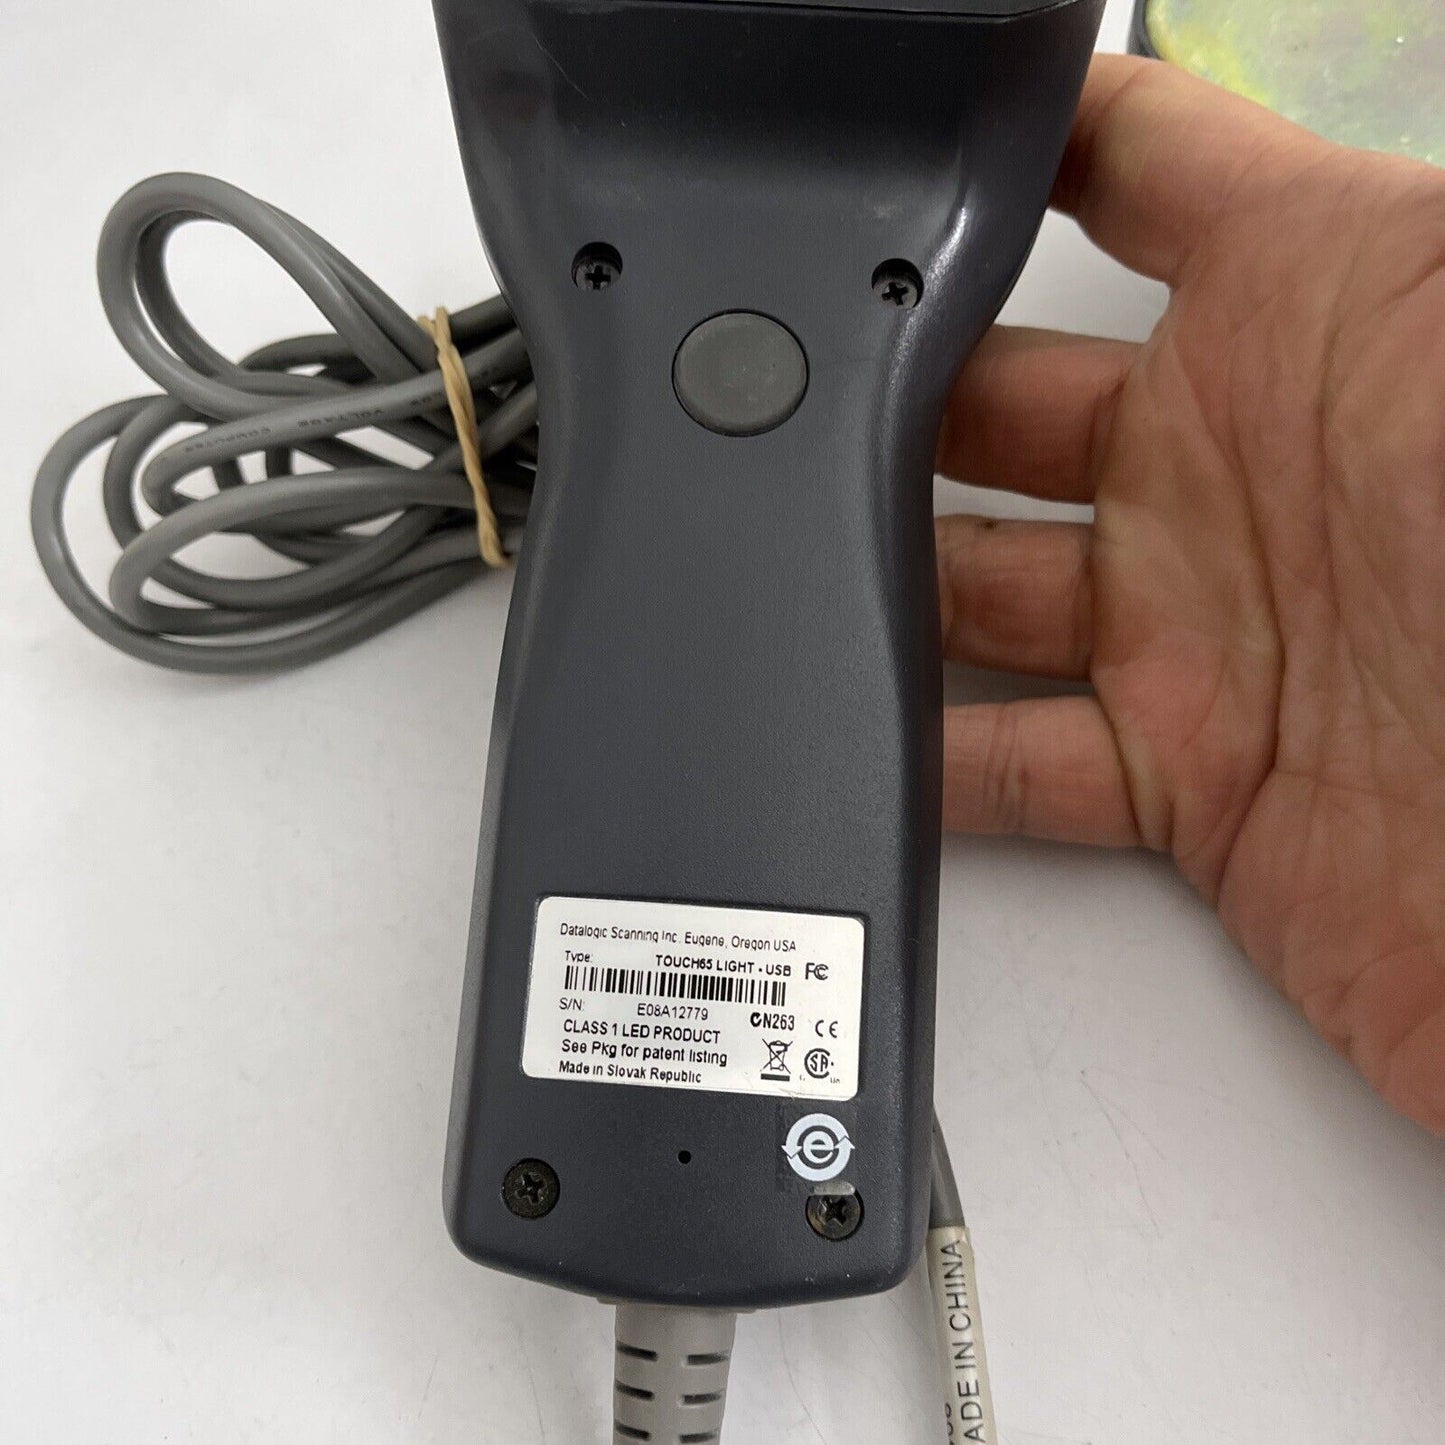 Datalogic Touch 65  Barcode Handheld Scanner USB with Stand